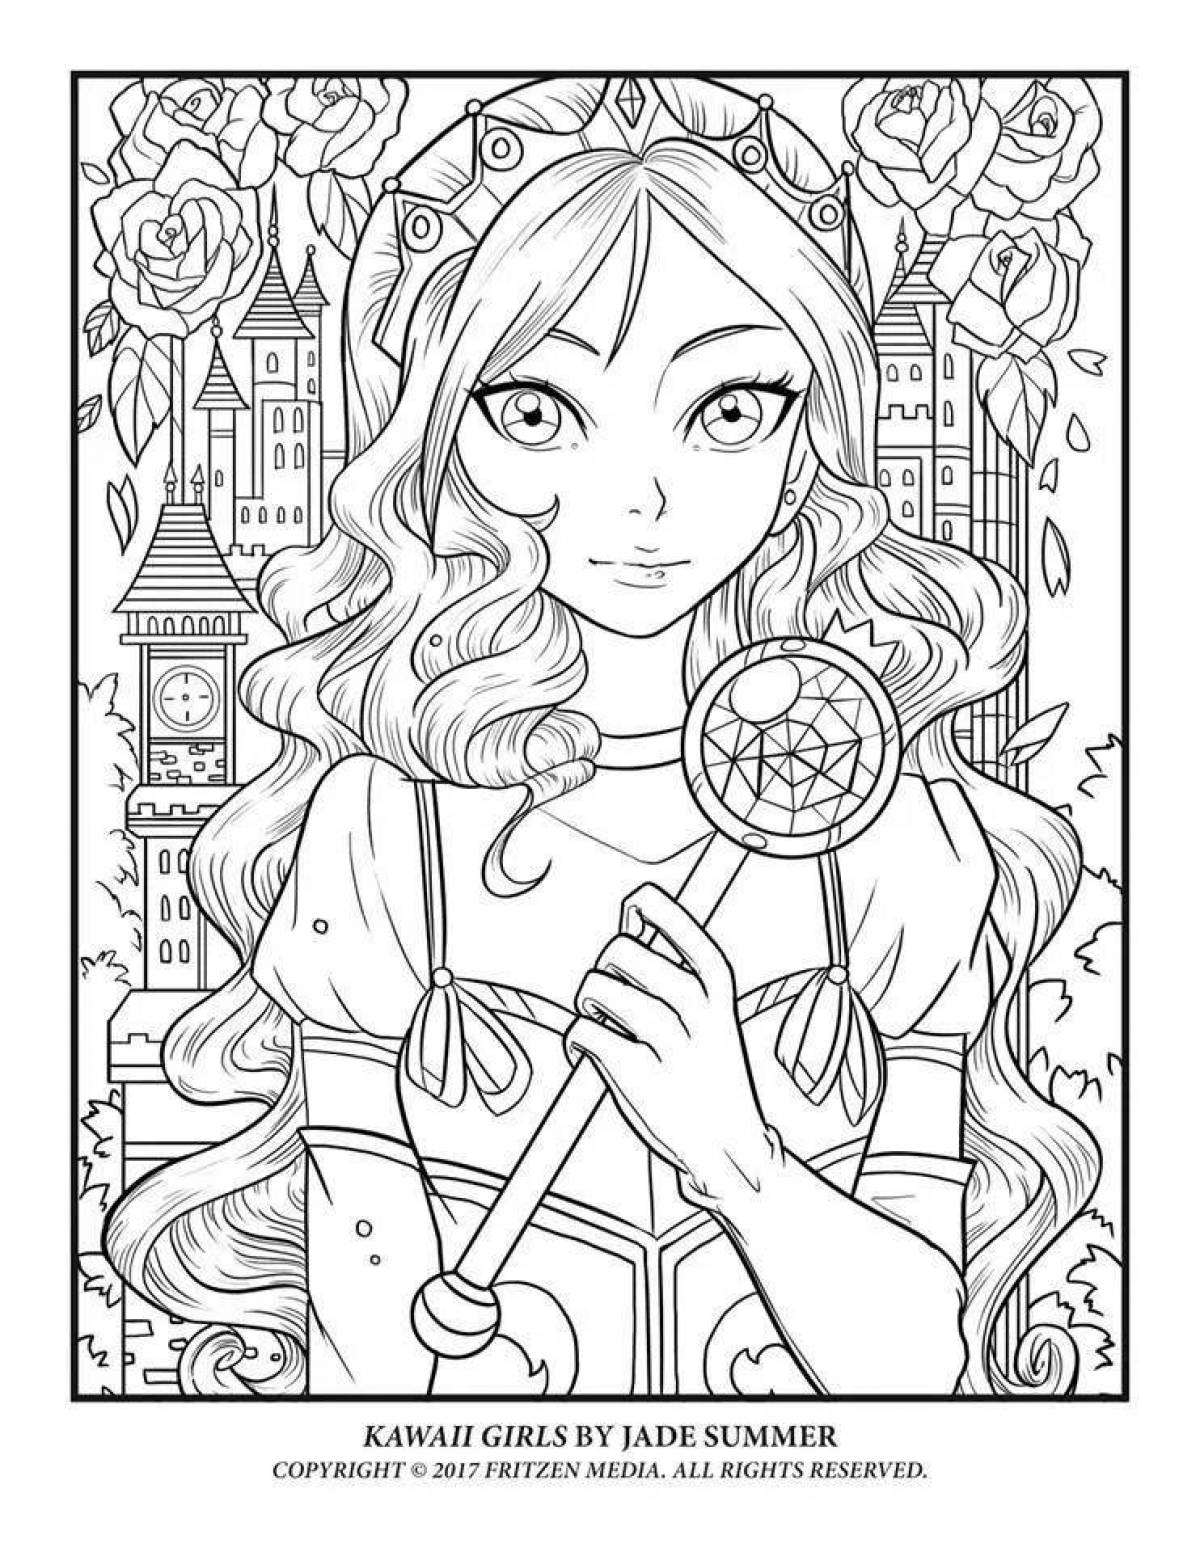 Coloring-imagination coloring page